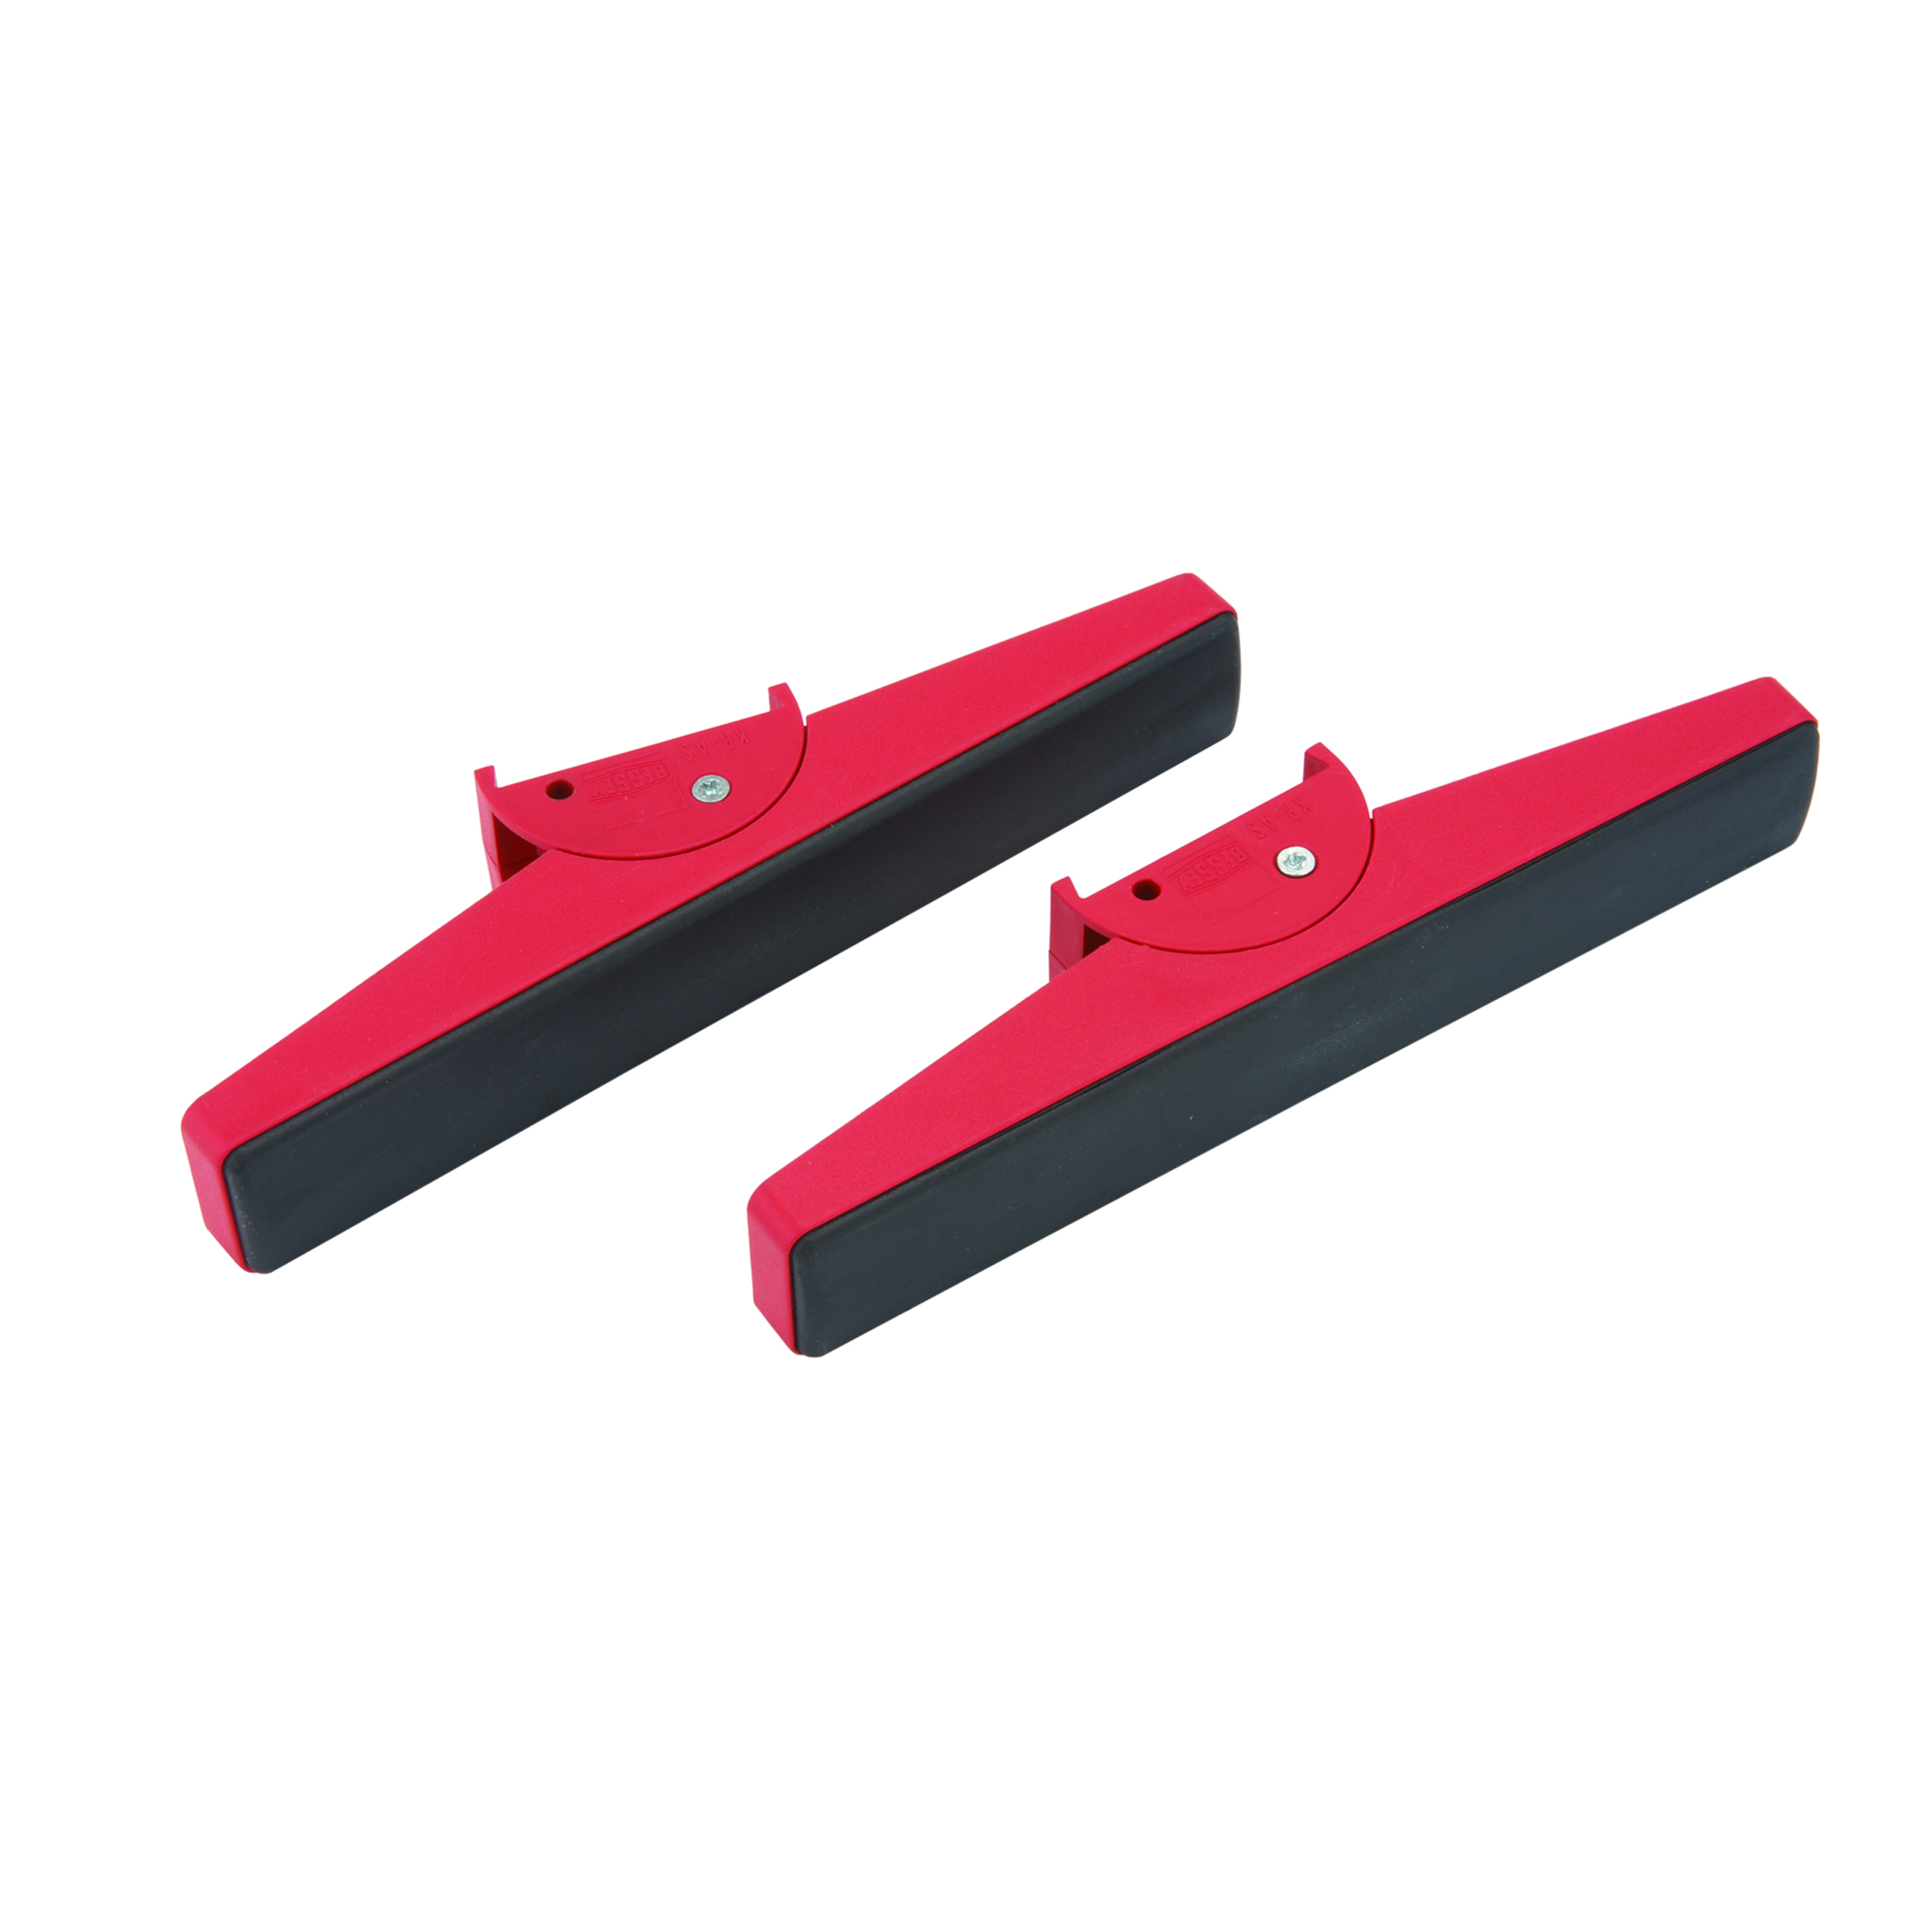 Revo Parallel Clamp Wide Angle Jaw Adapter, Pair